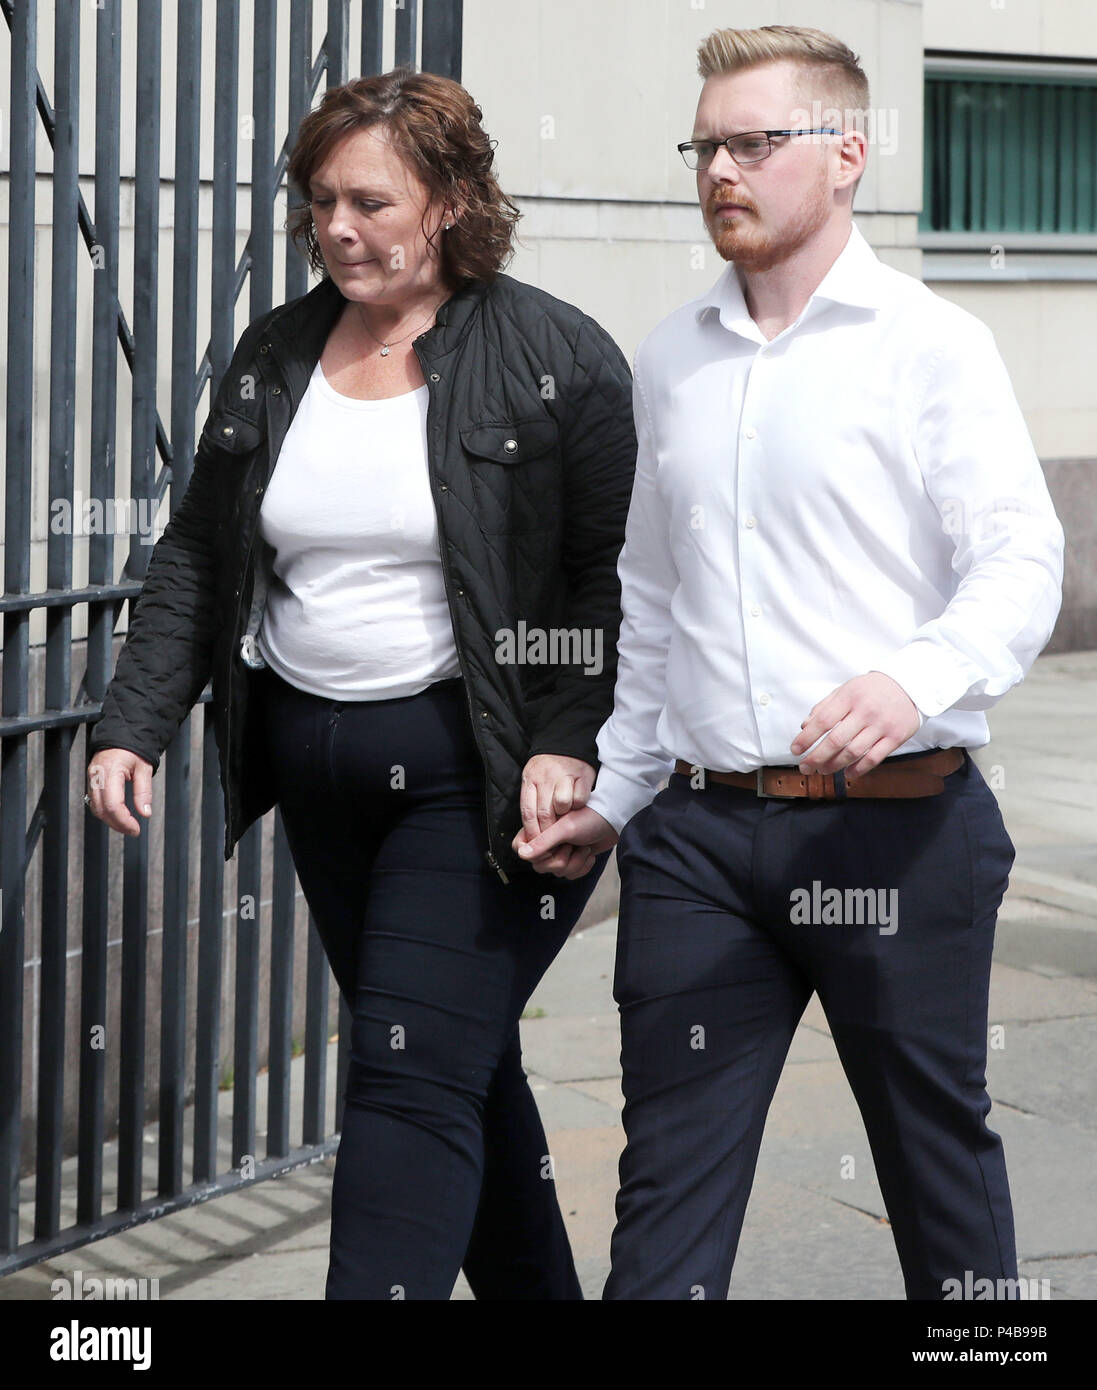 Murdered prison officer David Black's widow Yvonne (left) and other family member leaving Belfast Crown Court after Damien Mclaughlin walks free as prosecutors decided not to appeal against a judge's ruling that part of the evidence was unsafe in the trial. Stock Photo